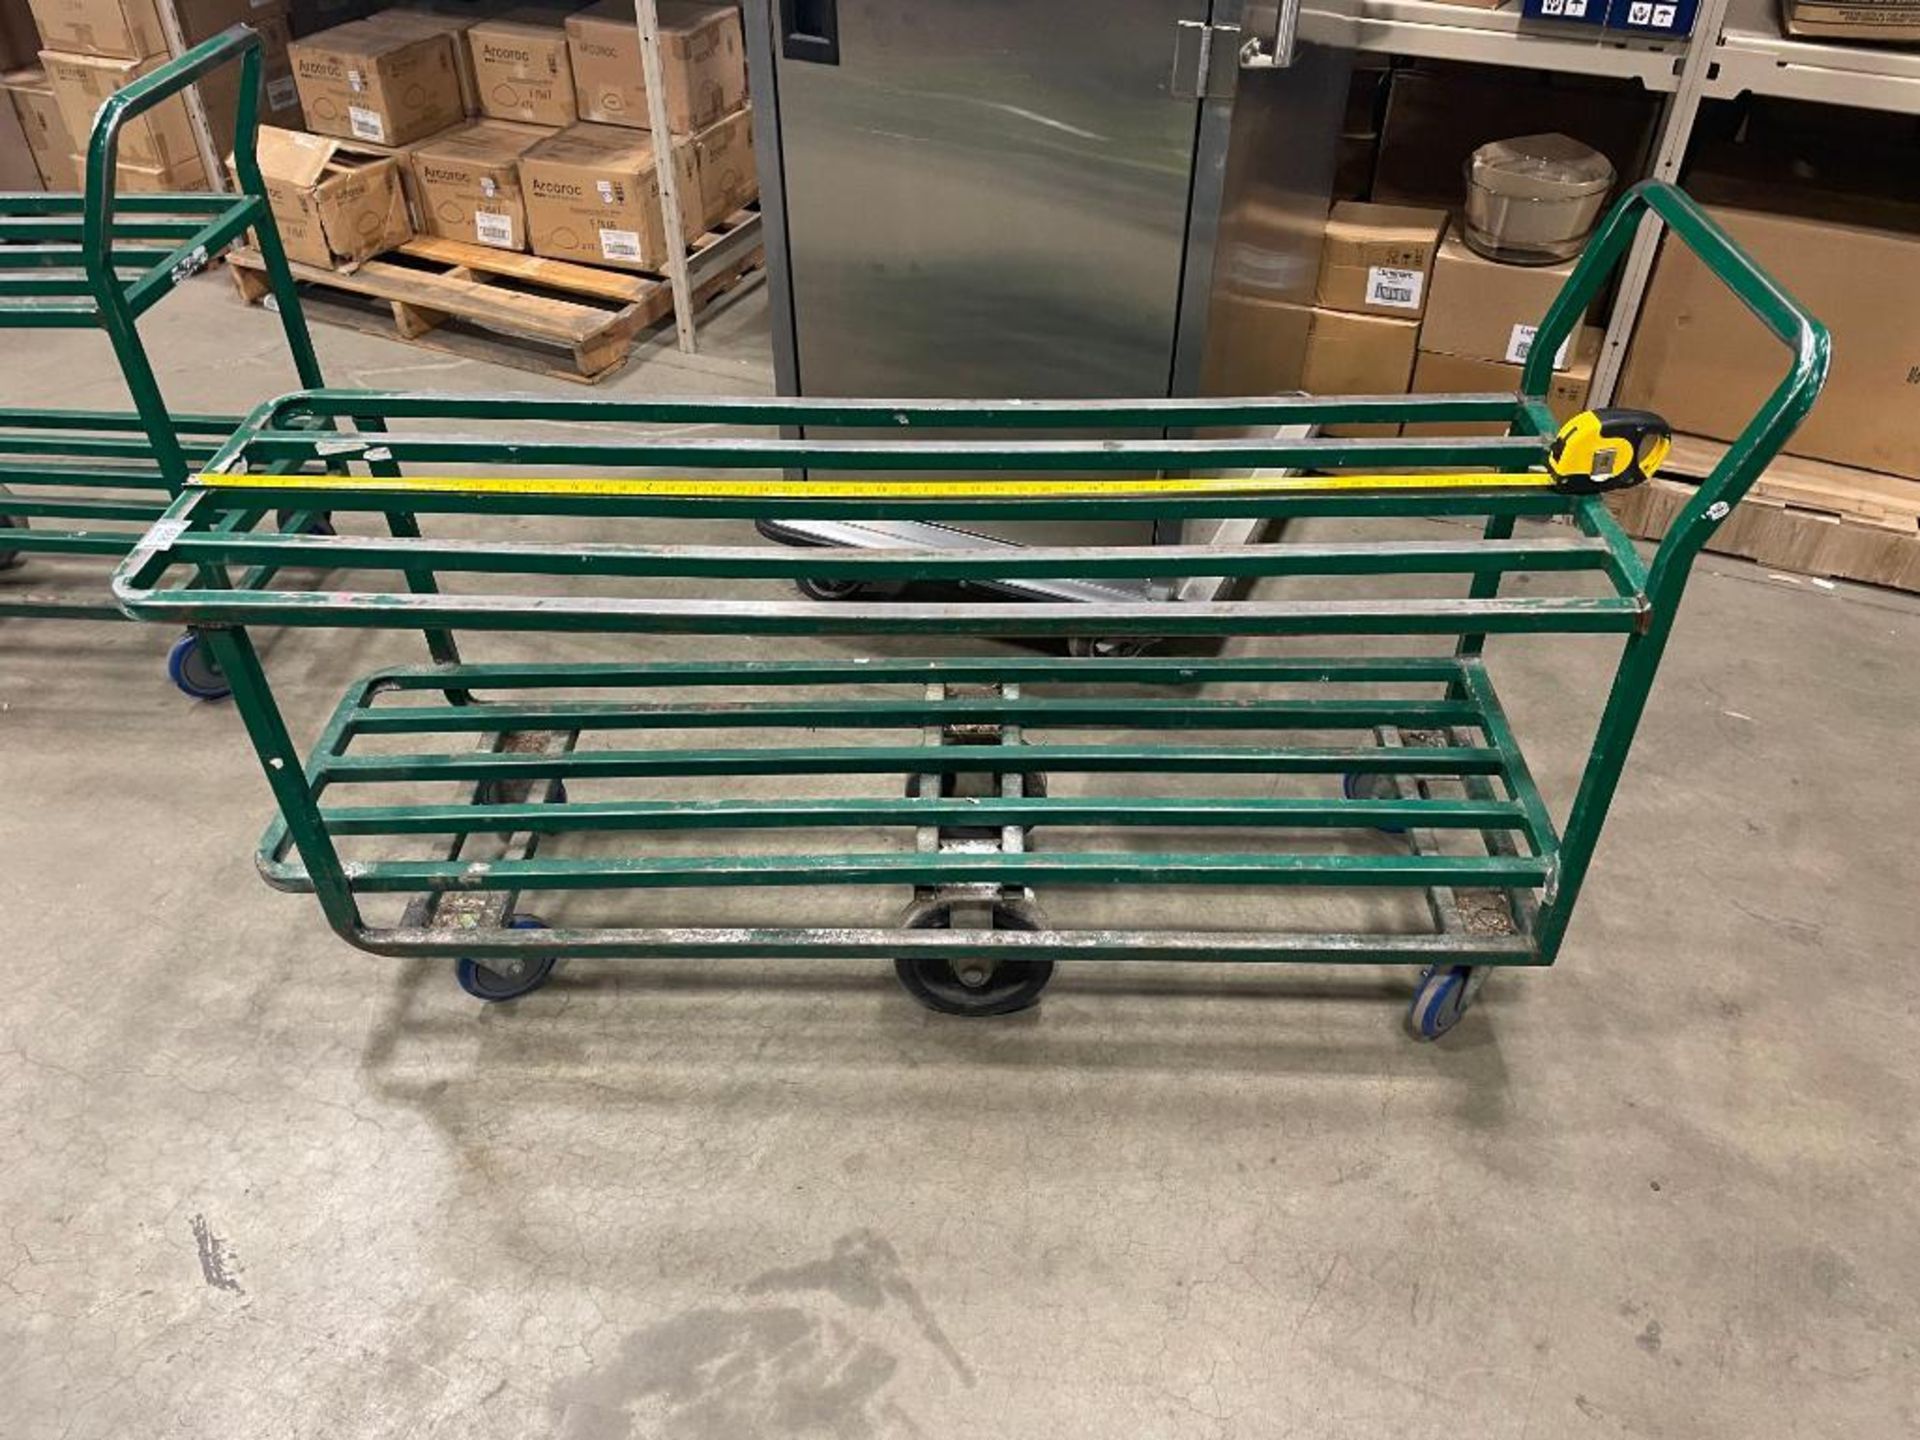 2 TIER GREEN STEEL WAREHOUSE STOCKING CART - Image 2 of 4